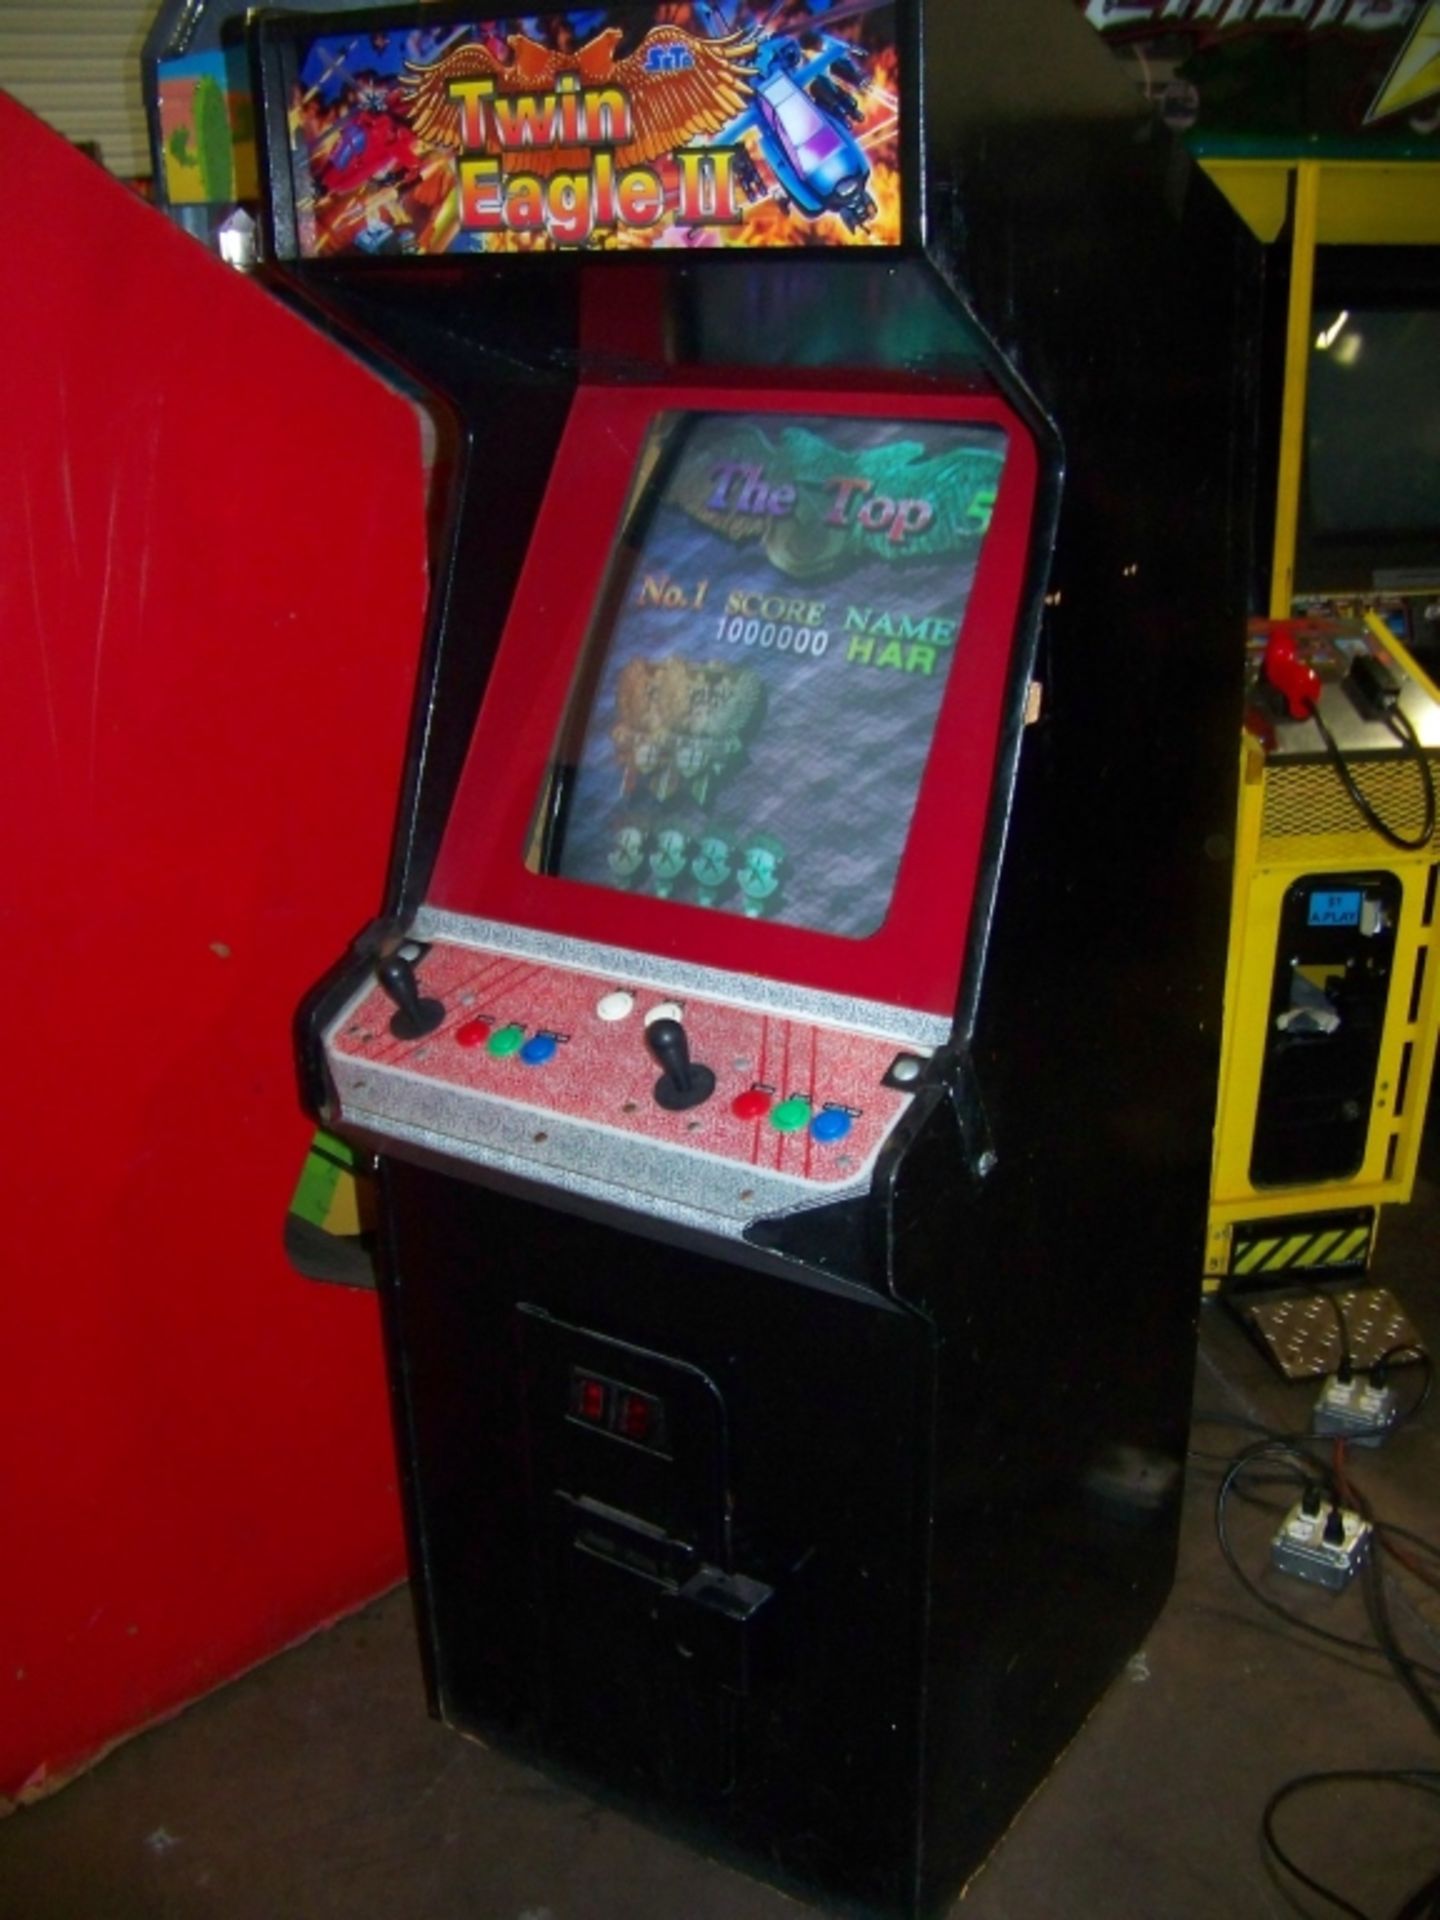 TWIN EAGLE II VERTICAL SHOOTER ARCADE GAME - Image 2 of 2